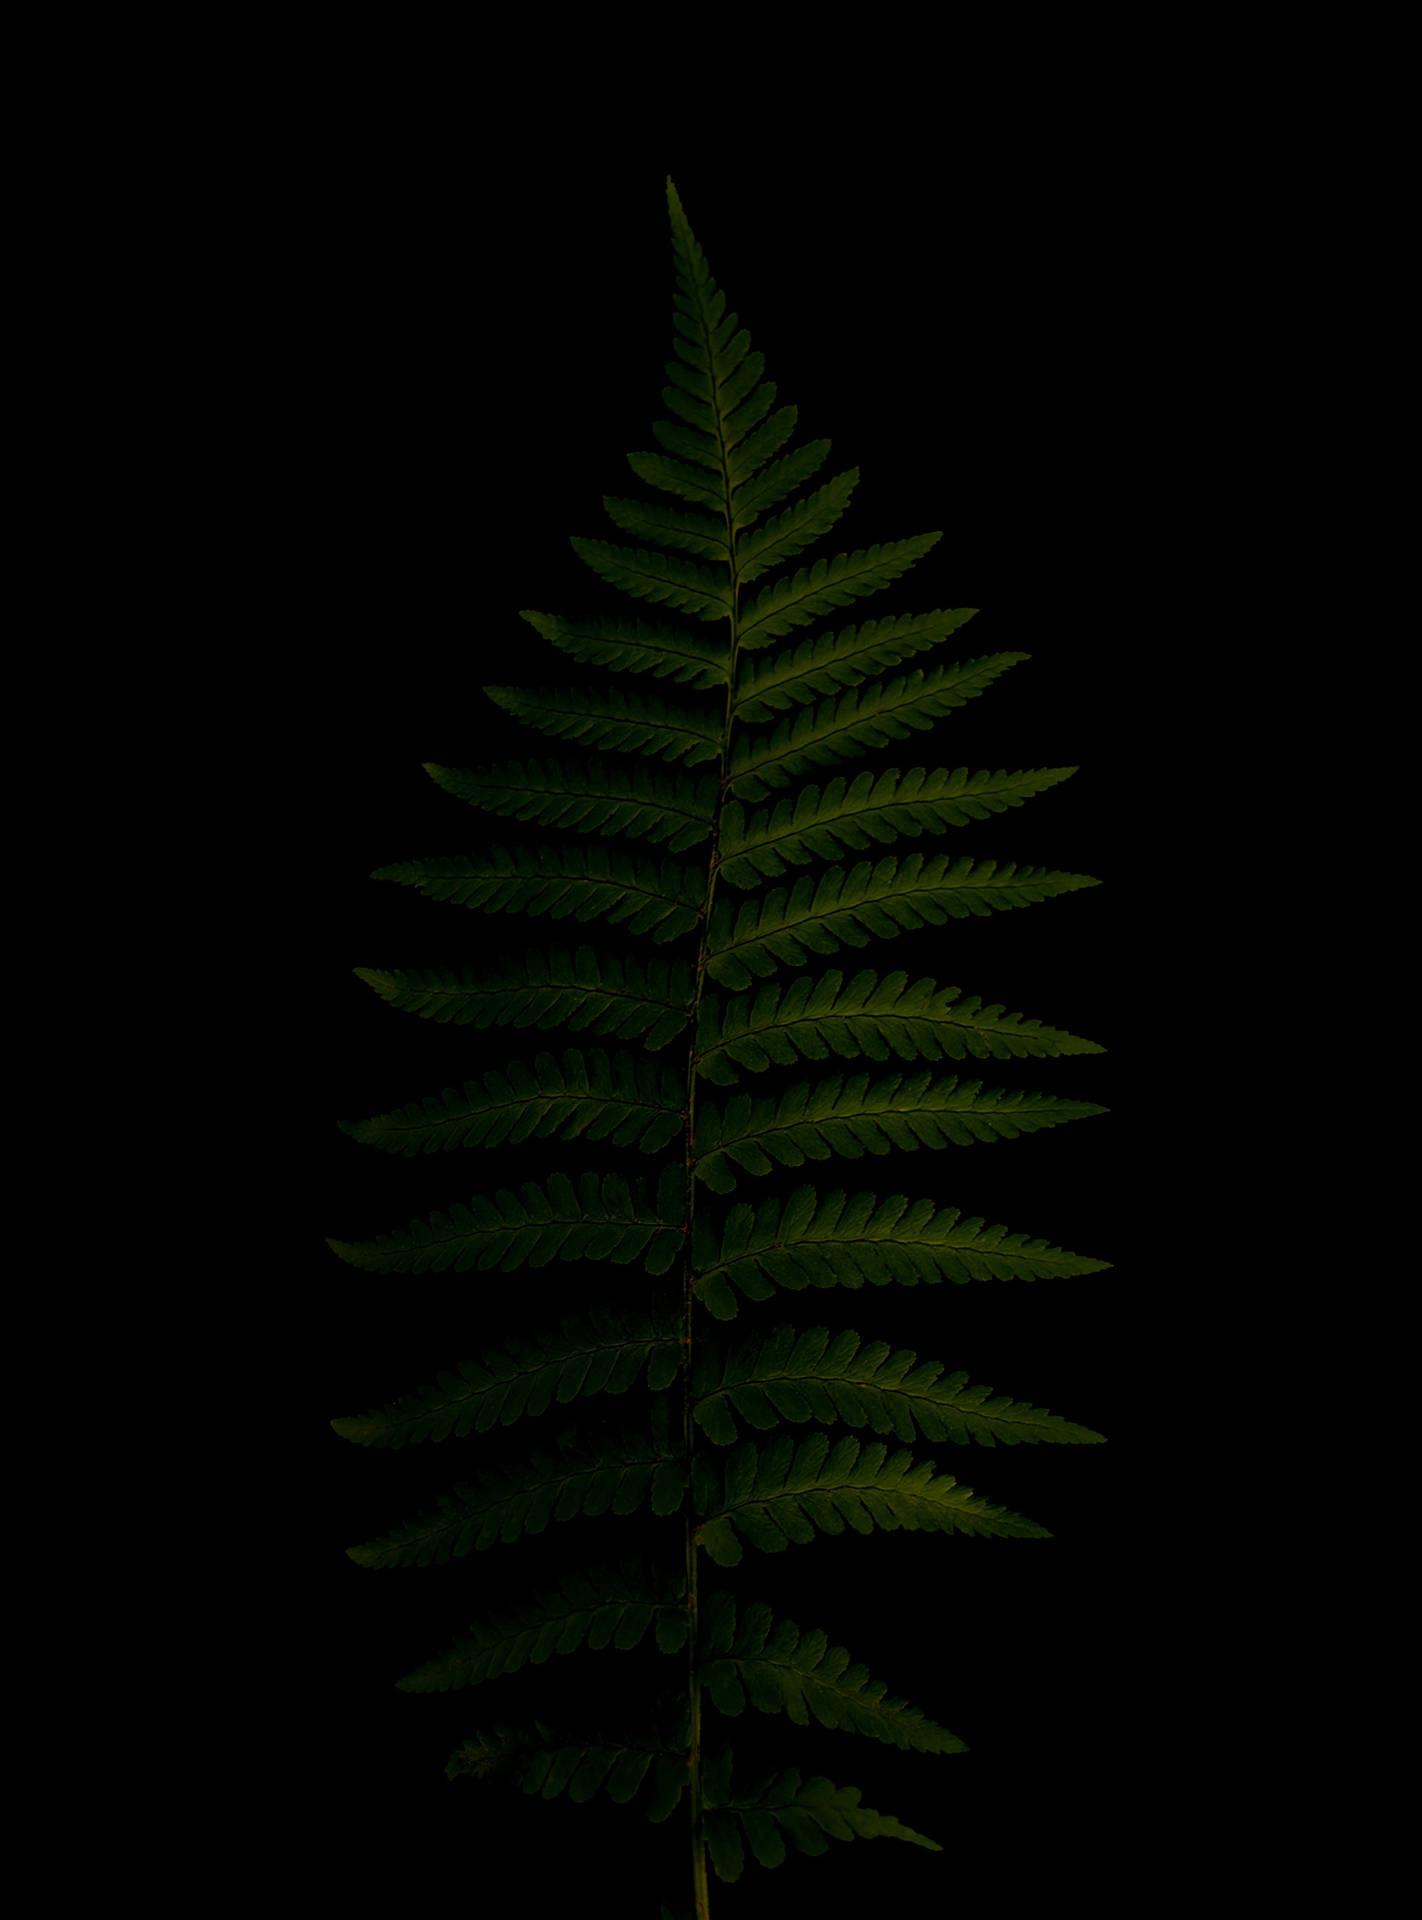 Caption: Vibrant Green Fern On Pure Black Background Hd Phone Wallpaper Background